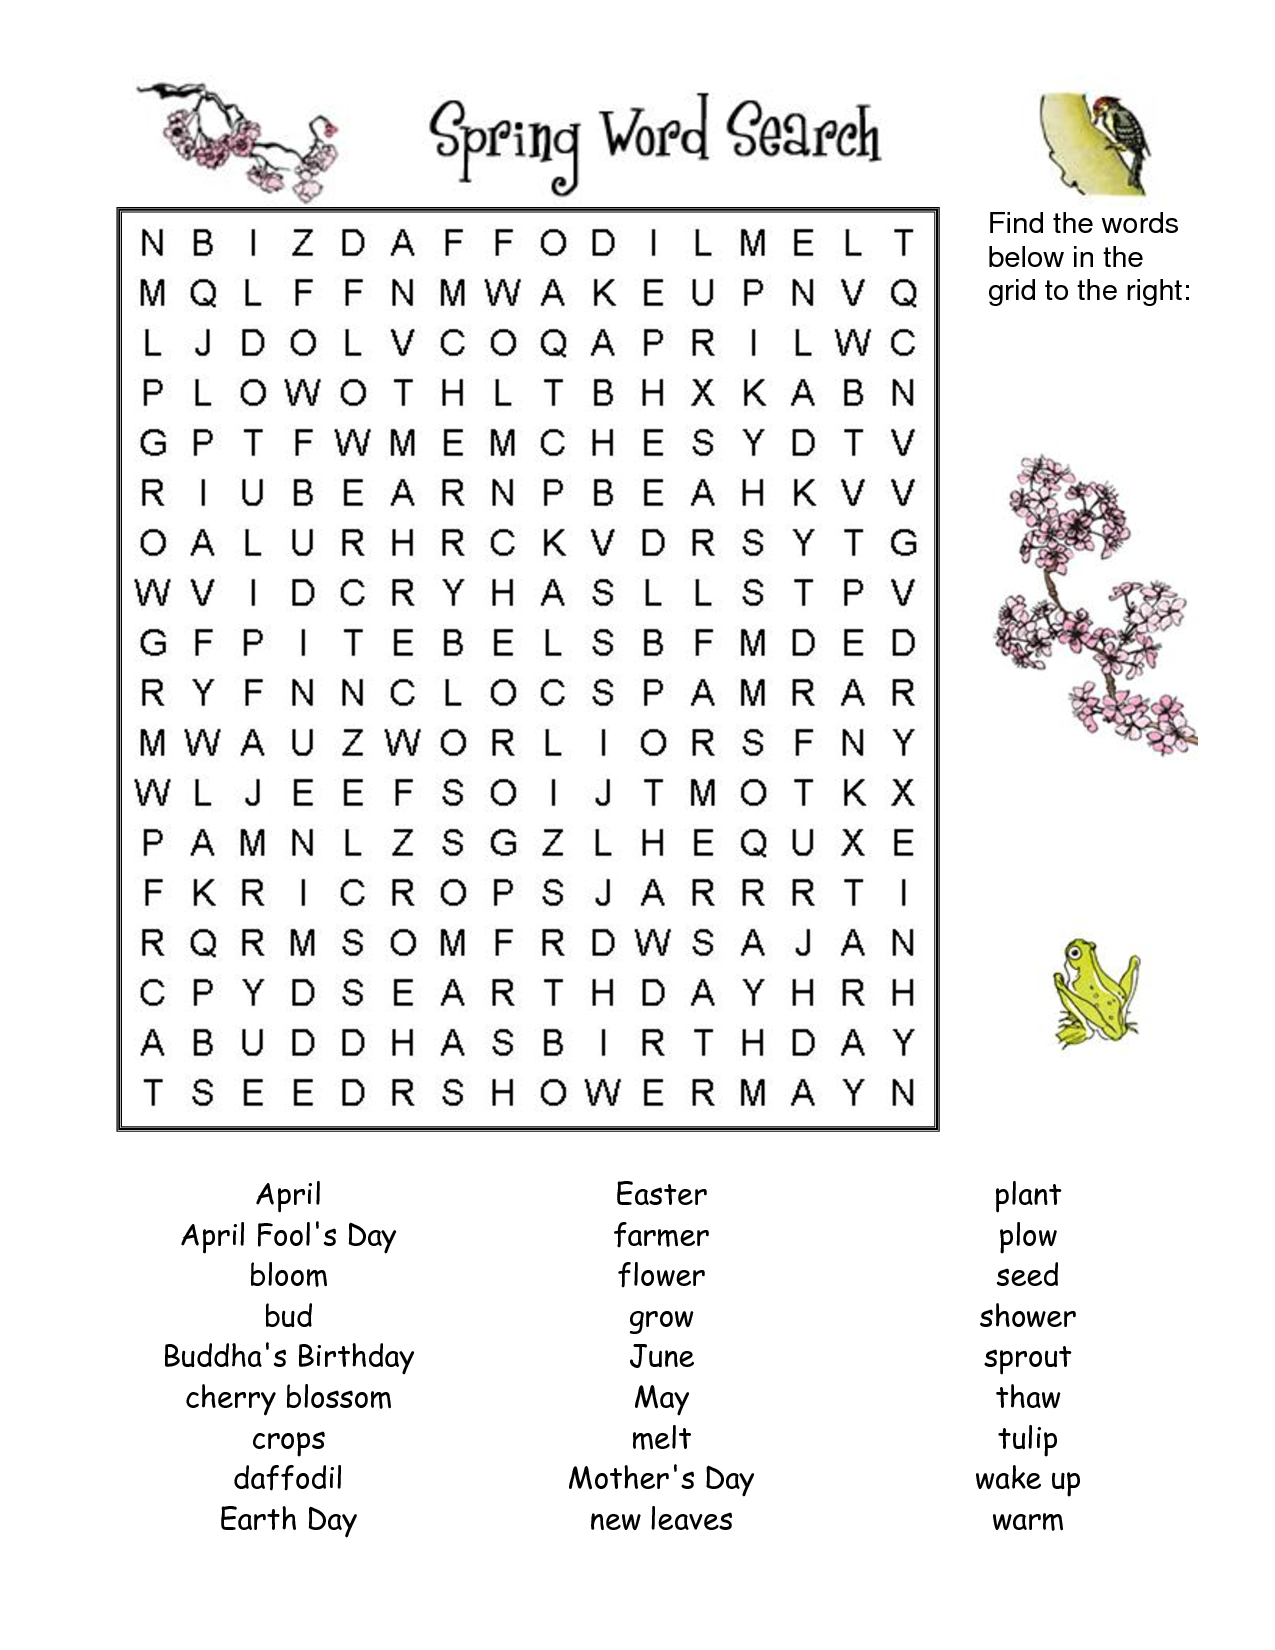 7 Printable Spring Word Searches | Kittybabylove - Printable Crossword Spring